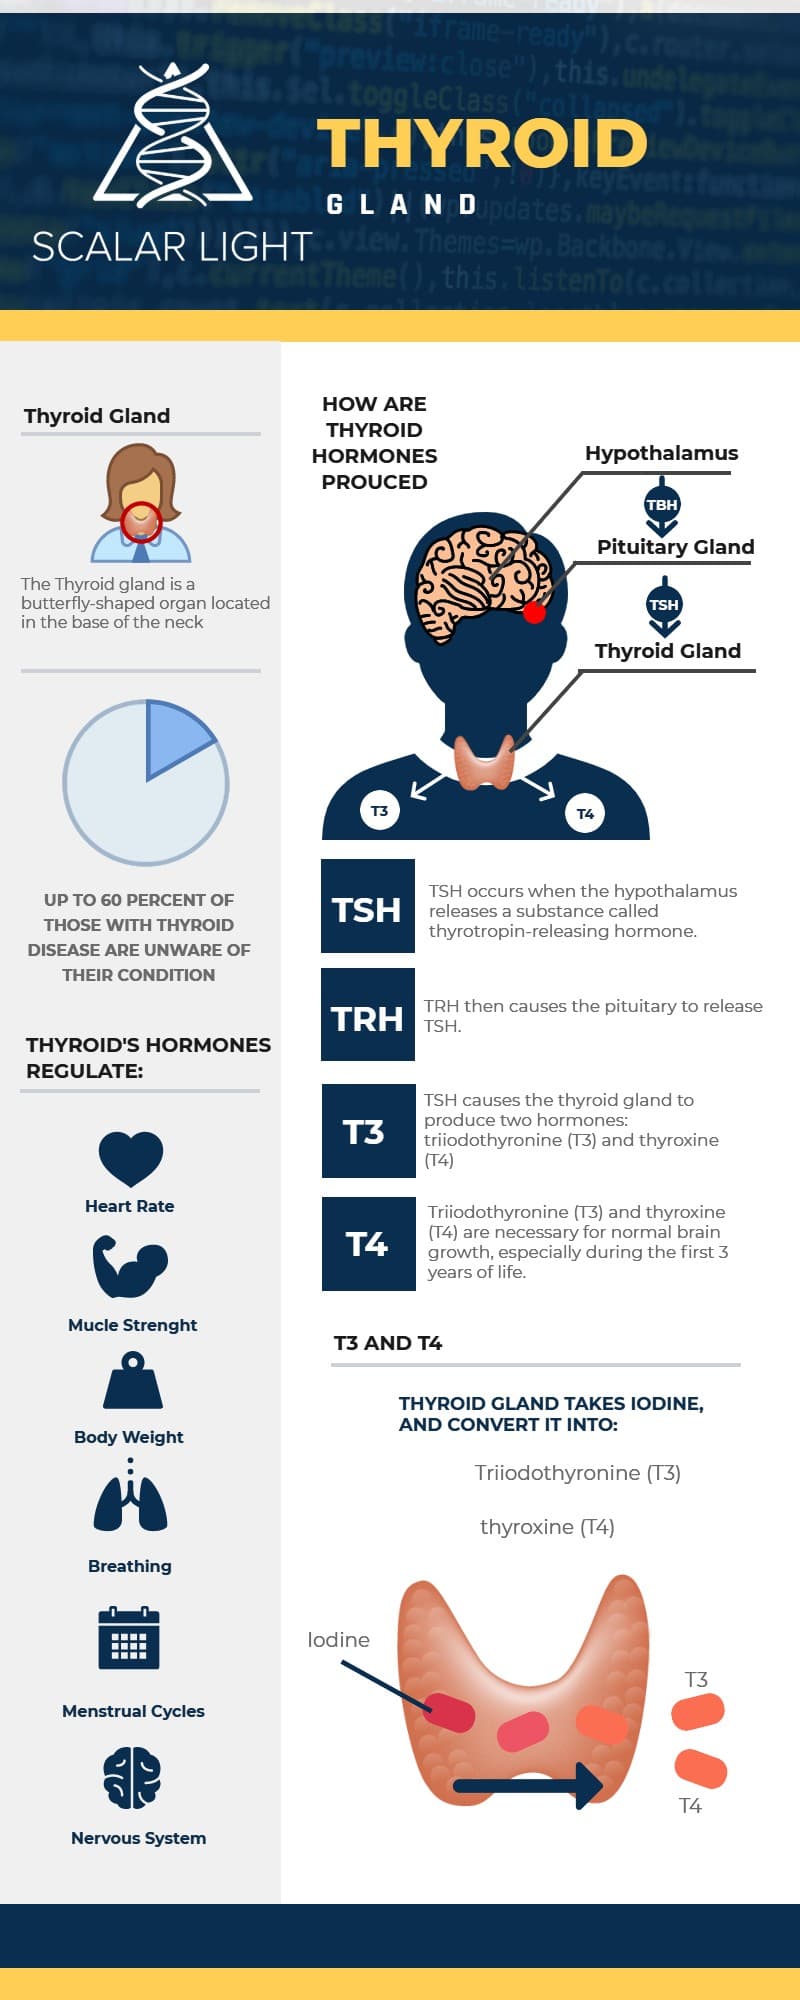 The Thyroid Gland Explained (Infographic)